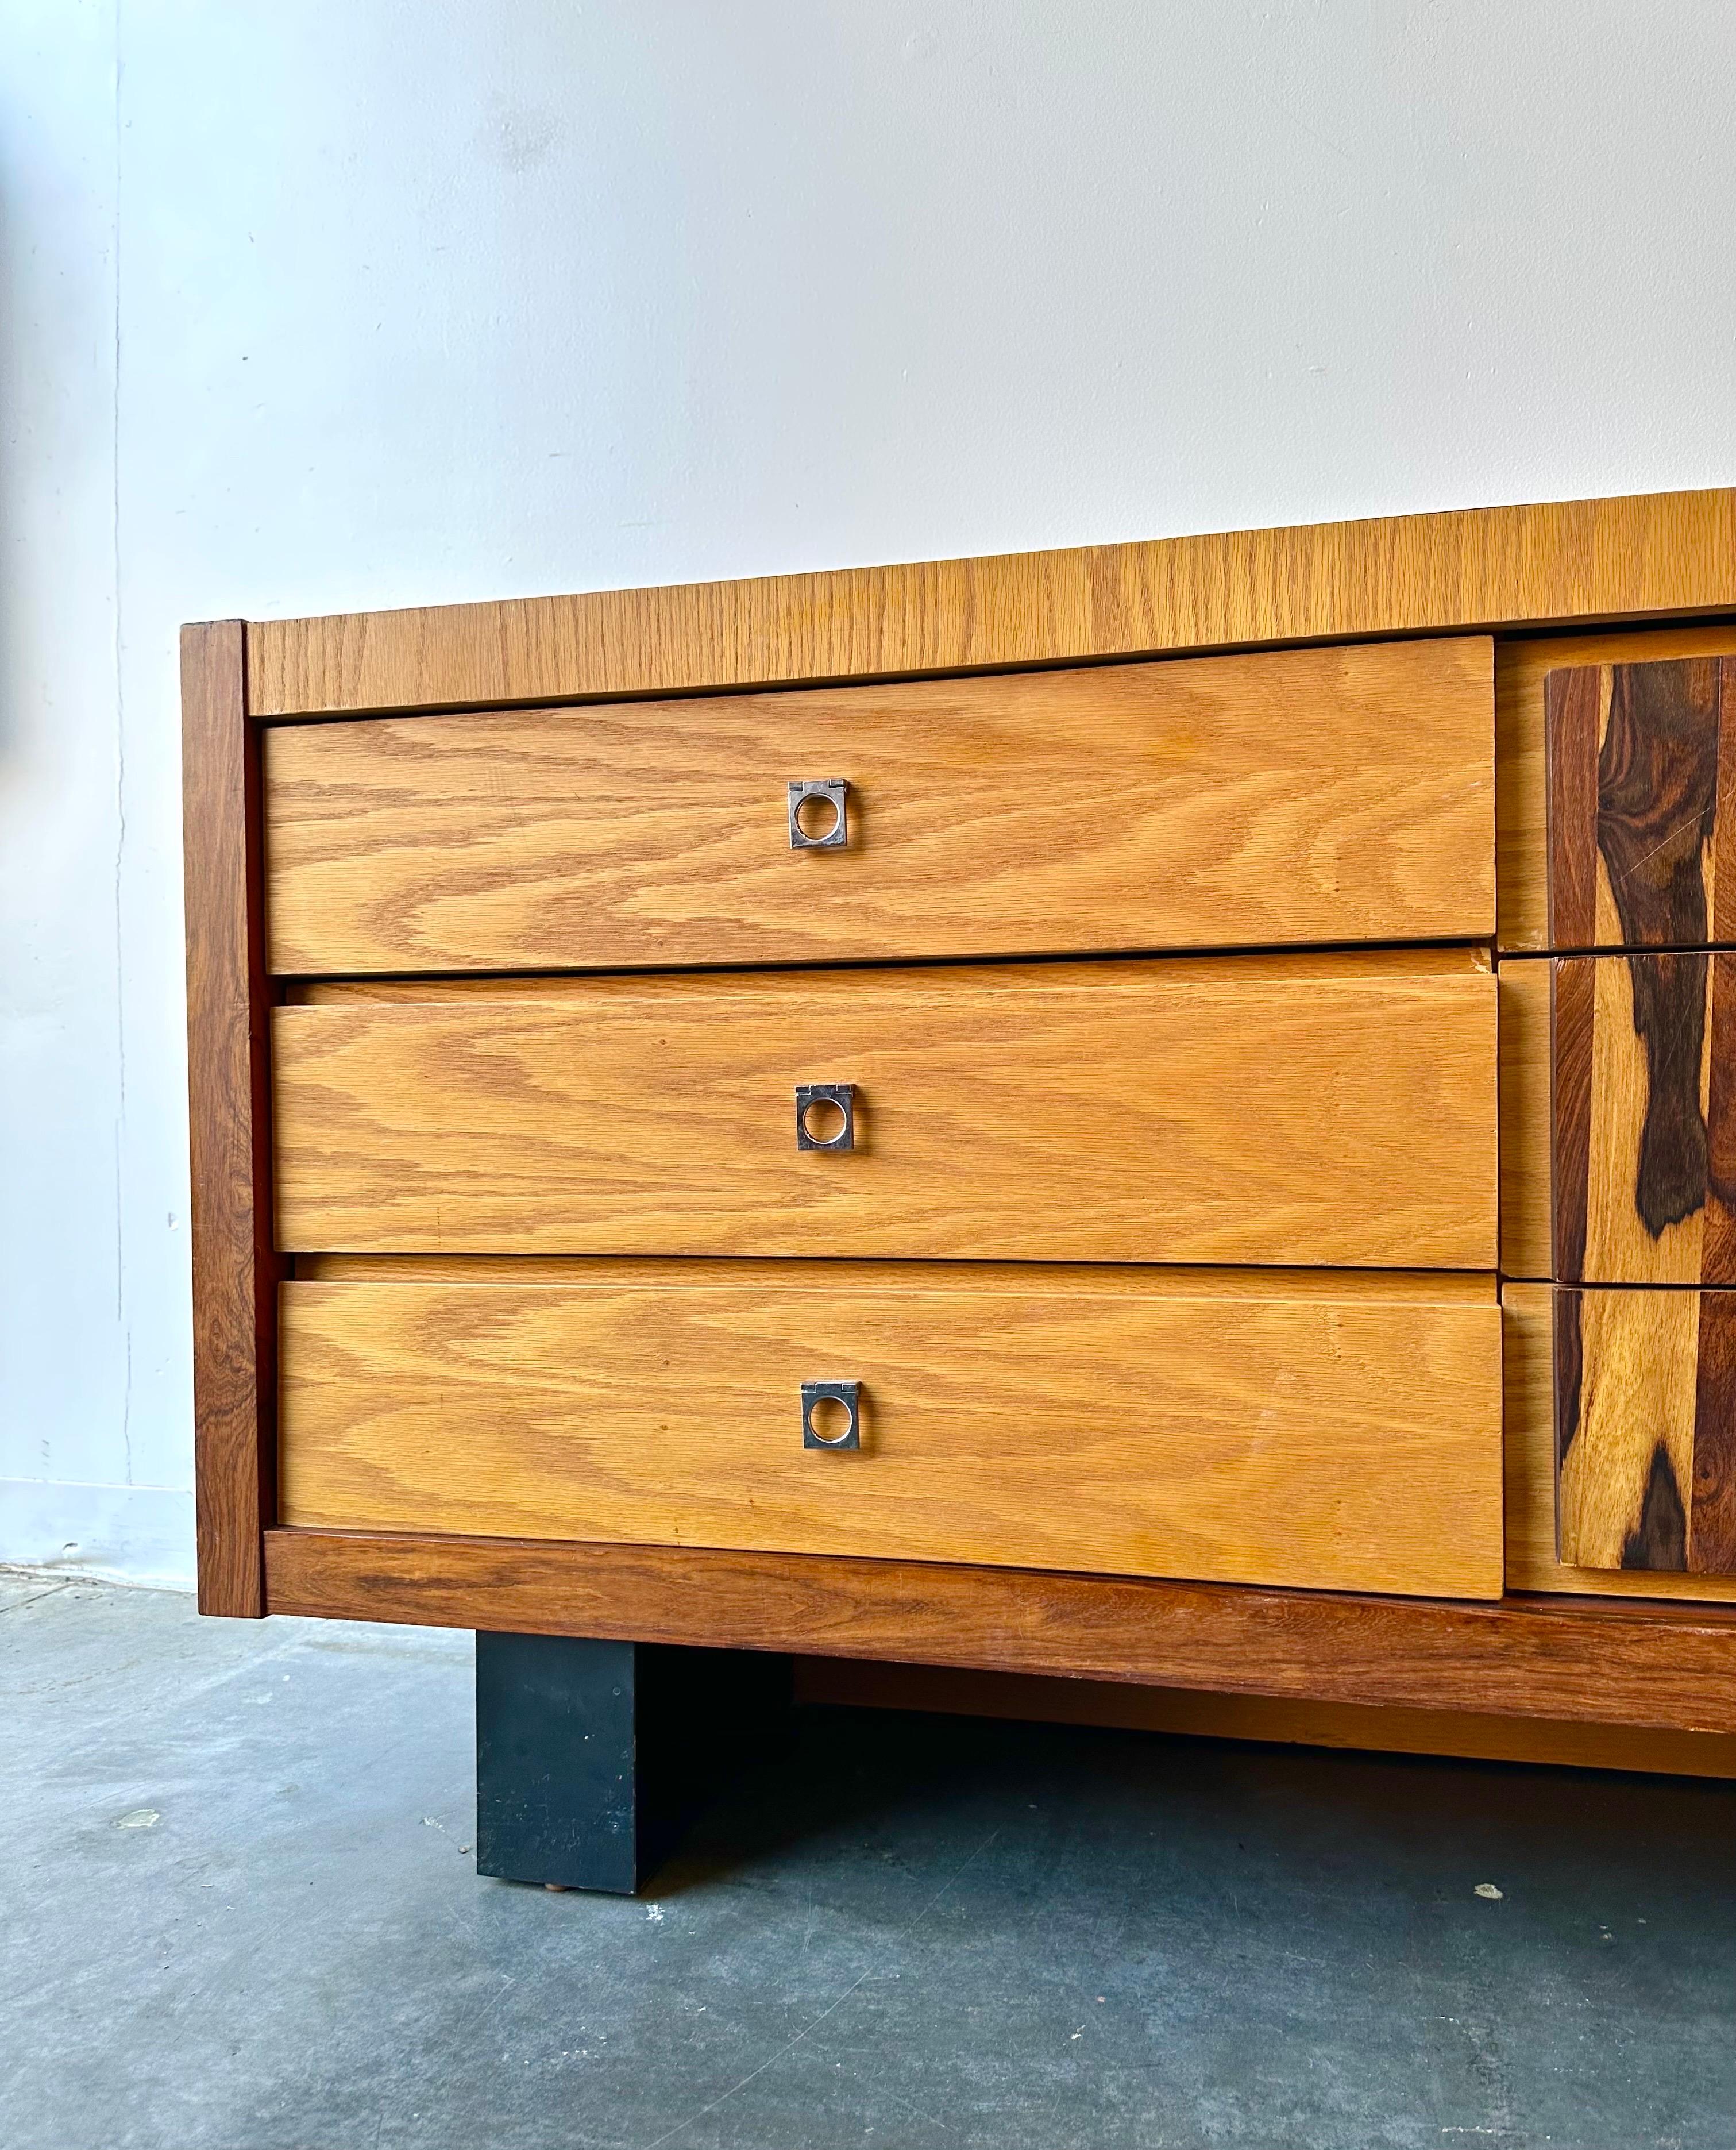 Vintage 1970s rosewood and oak lowboy nine drawer dresser or the perfect credenza.

This piece was made in Canada circa 1970 and is in great vintage condition with minor signs of wear.

Dimensions:
79.5” W x 20.25” D x 30” H 